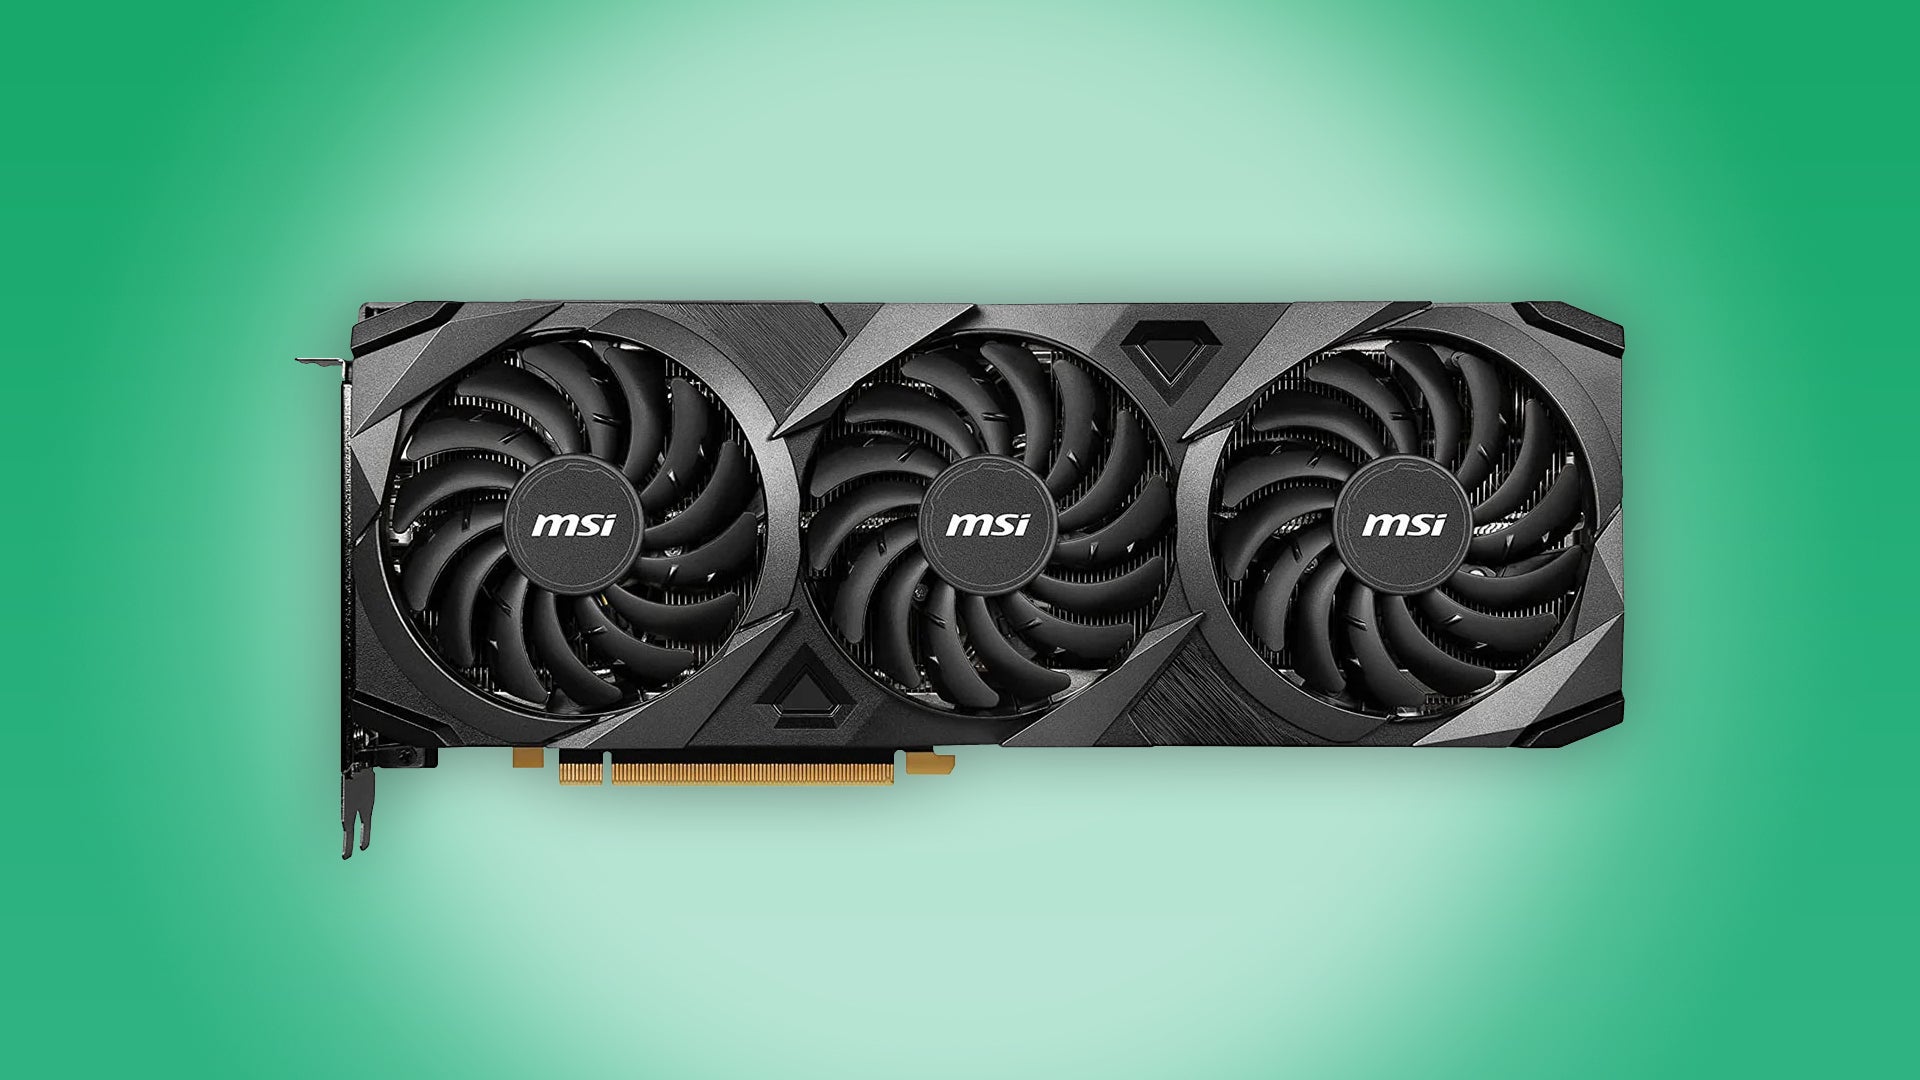 This MSI Ventus RTX 3080 12GB graphics card is $810 at Newegg ...